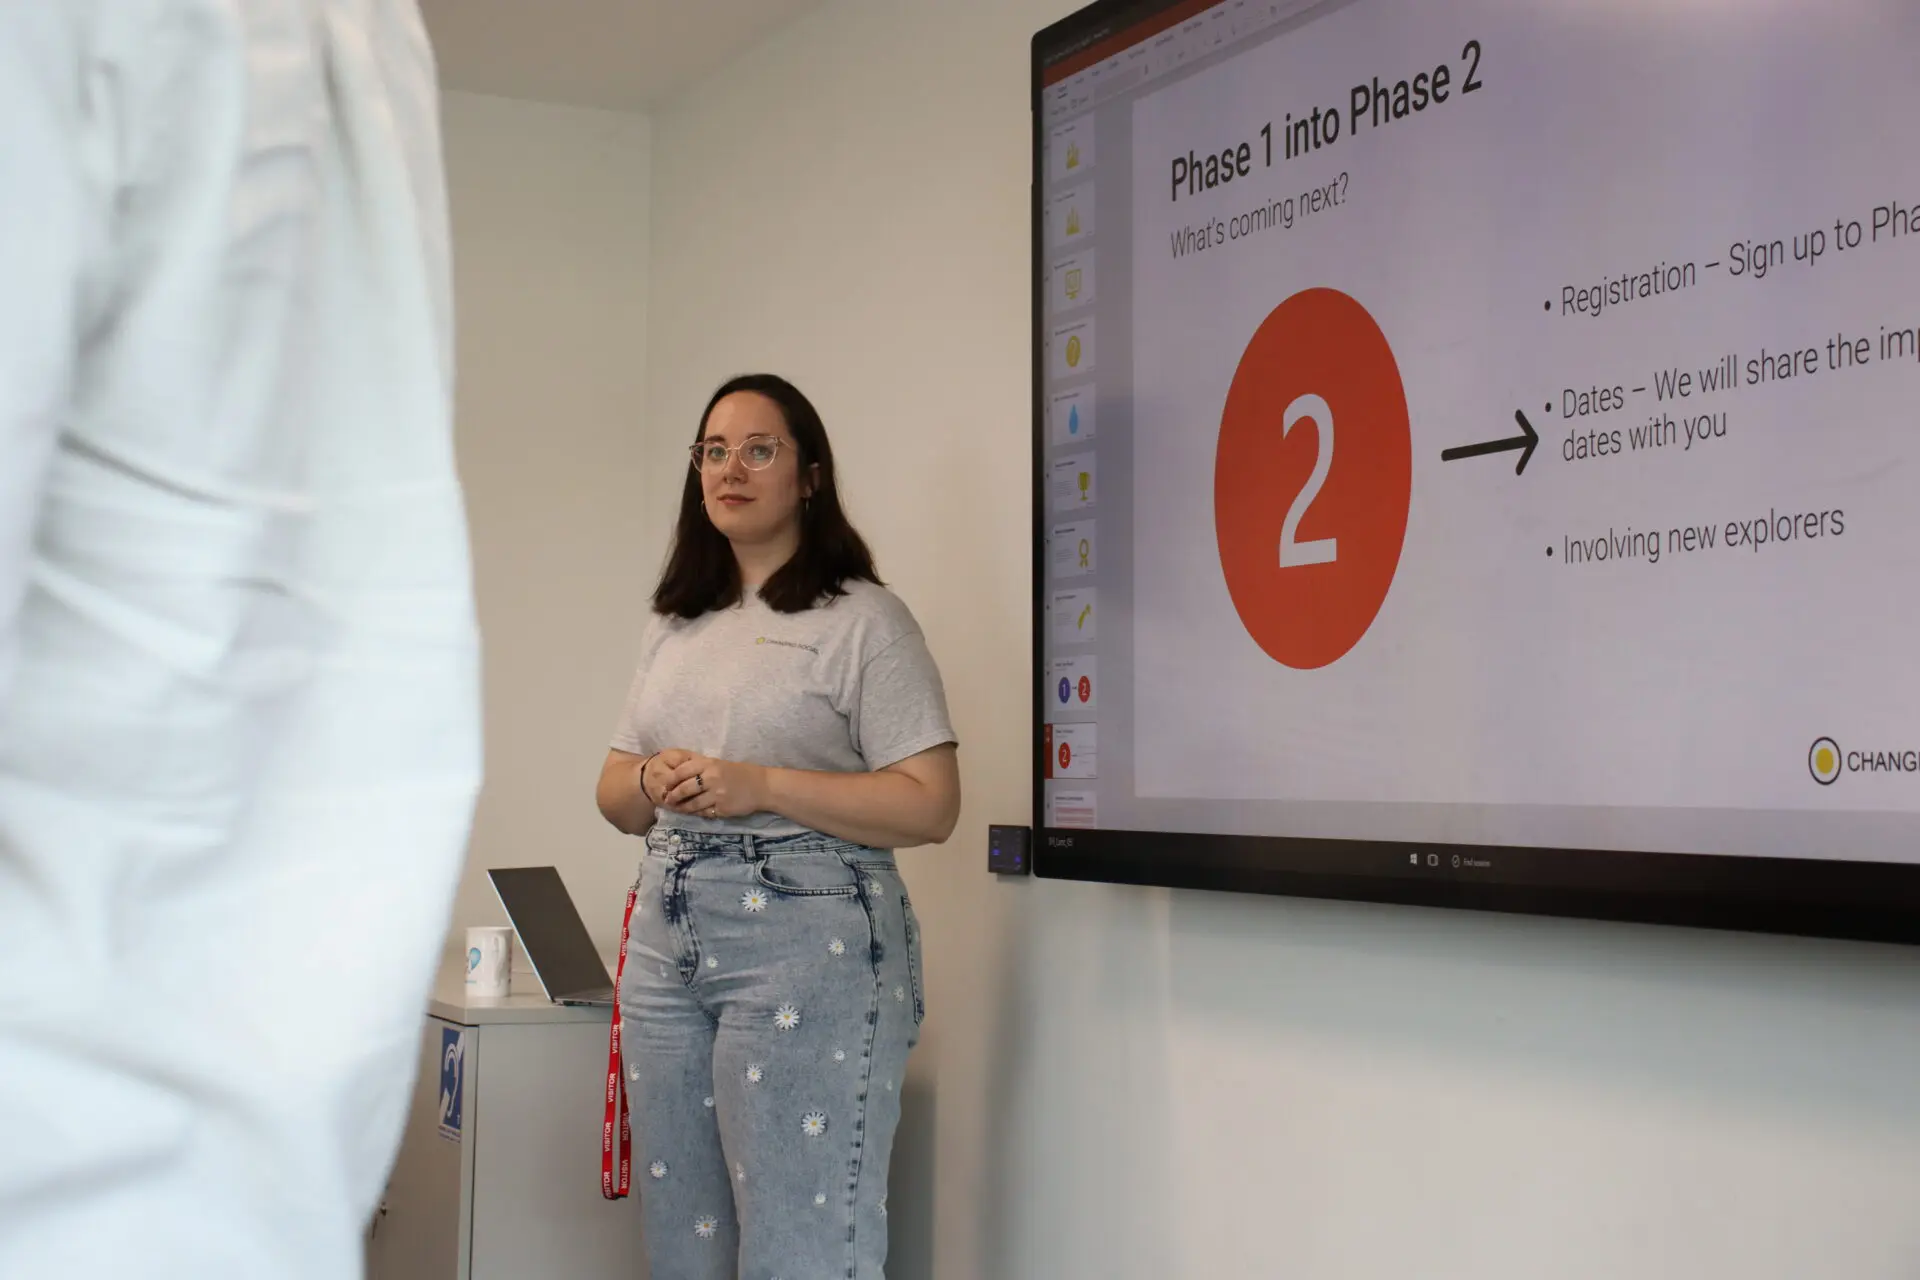 an image of a person wearing jeans and a t-shirt, standing by an electronic whiteboard.